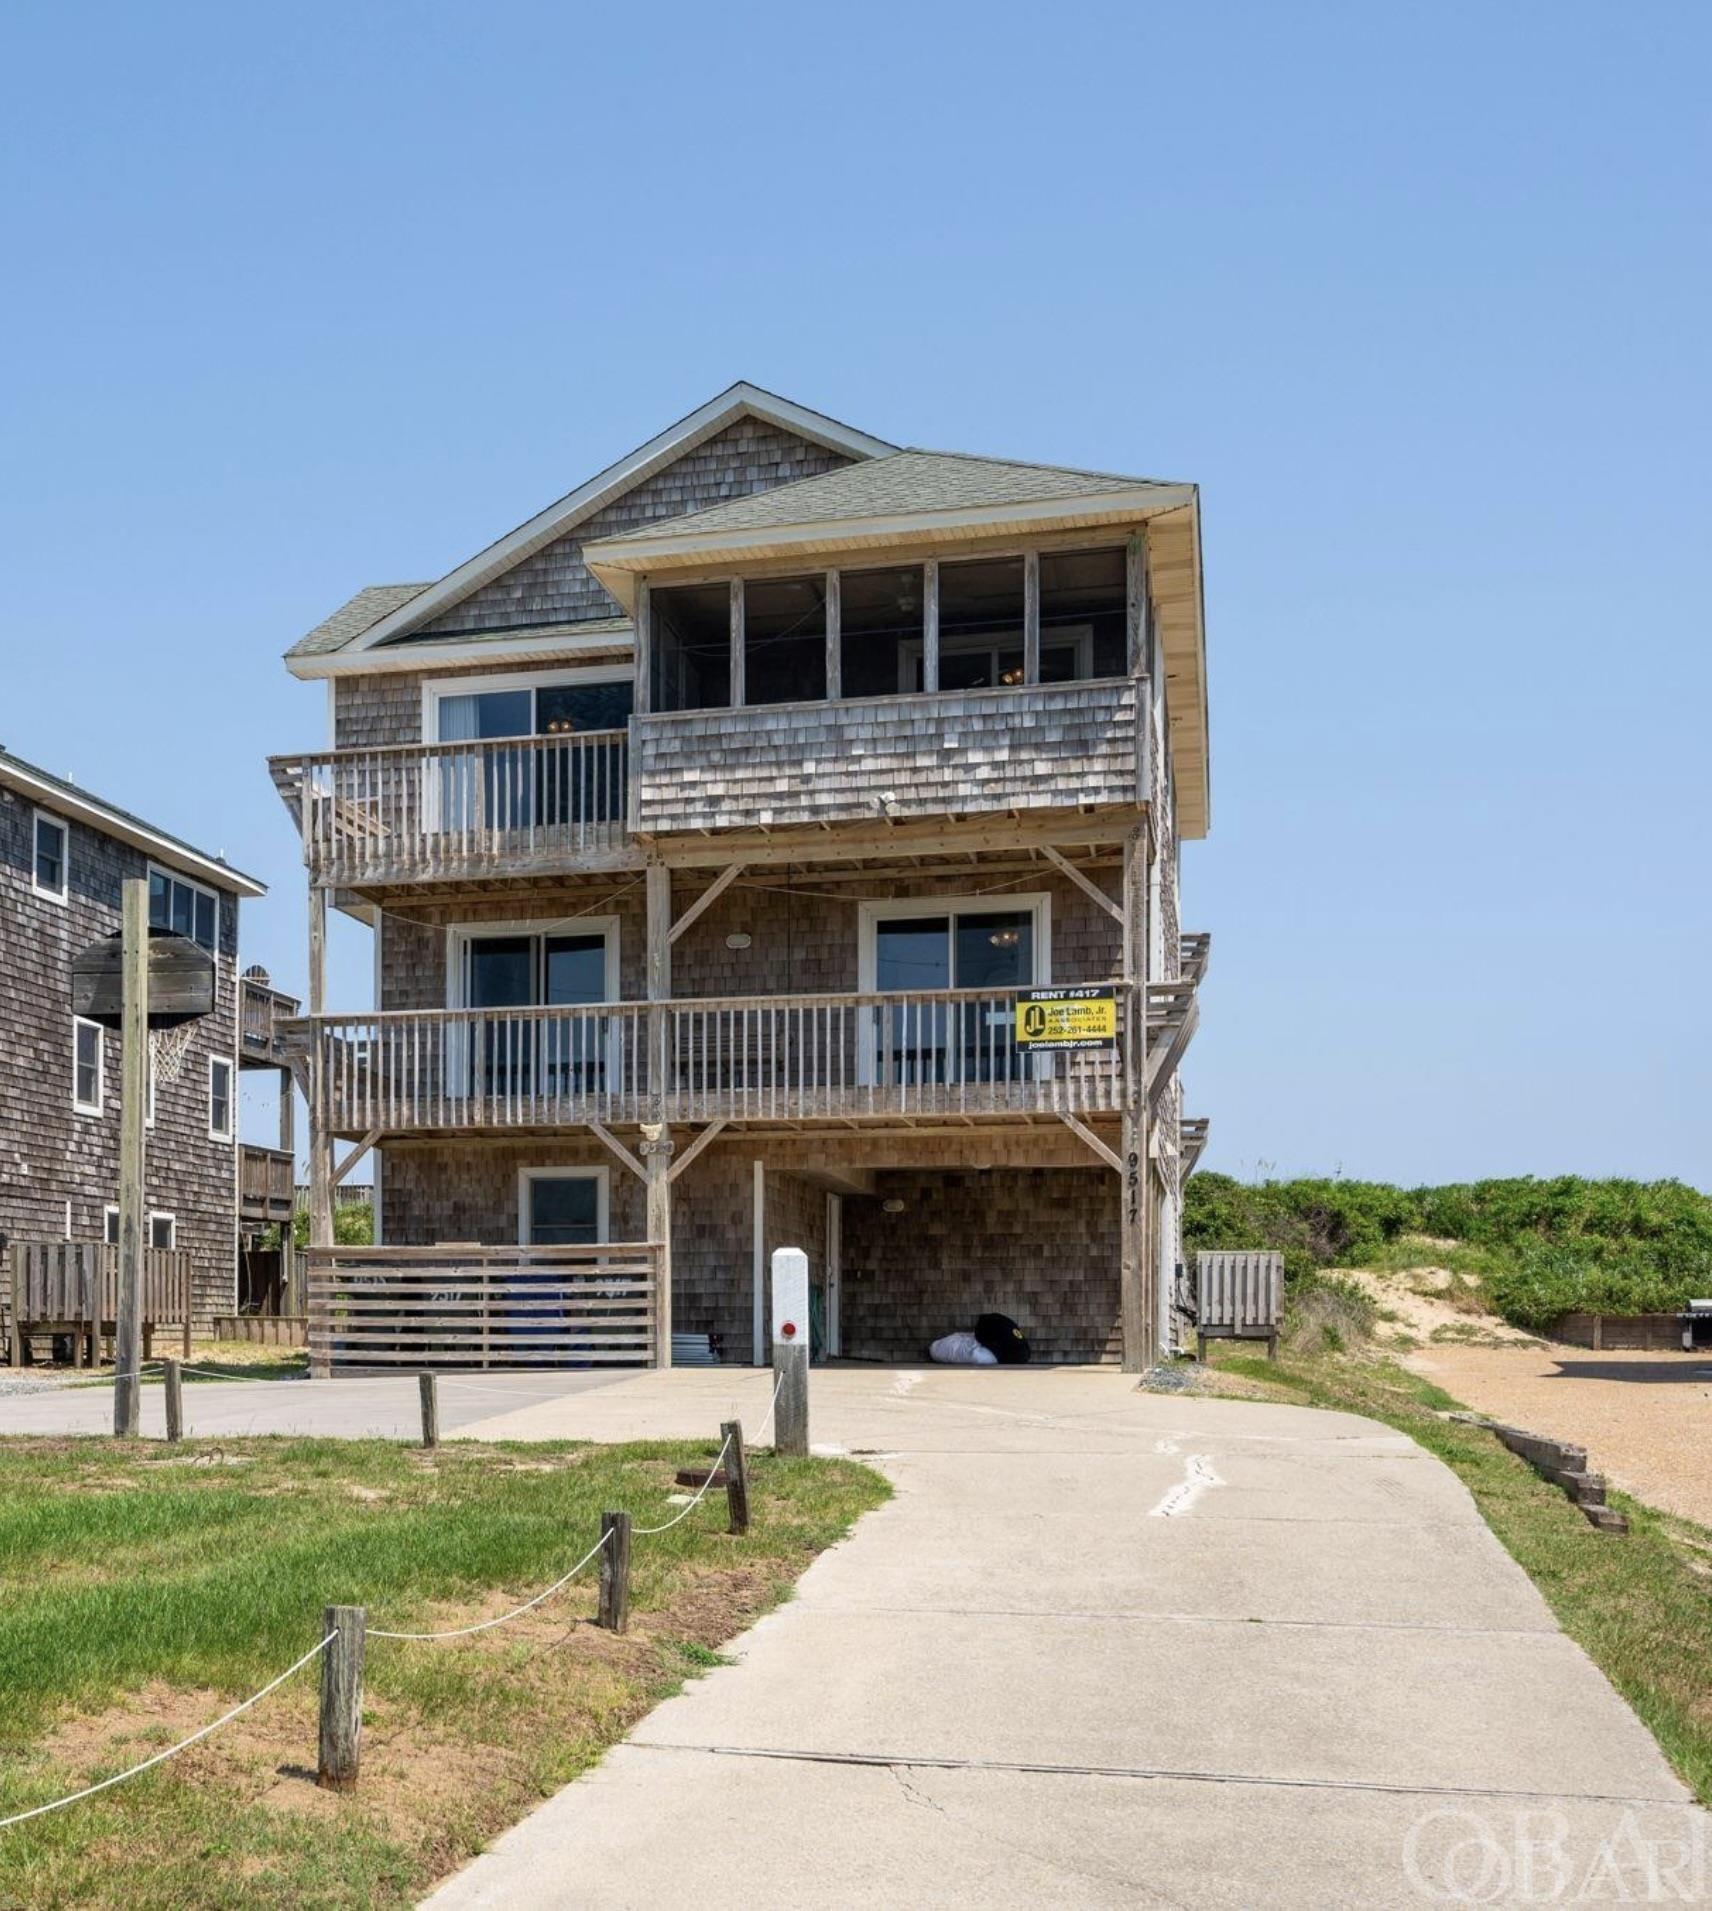 Oceanfront in South Nags Head with elevator, 7 bedrooms and 5 and ½ baths, perfectly named “Just Like Heaven”.    The home is well appointed, beautifully decorated and has an established rental performance history.  The living areas provide an open floor plan.  The outdoor features of this lovely home include an elevated walkway to the ocean, pool with heater, hot tub and multiple decks and a patio to enjoy the serene ocean views, parking for 7 vehicles, basketball goal, fish cleaning station and outdoor shower.  Ideally located in South Nags Head with convenient access to the Outer Banks Pier, Pea Island, Oregon Inlet Fishing Center, shopping, dining, entertainment and all the Outer Banks has to offer.